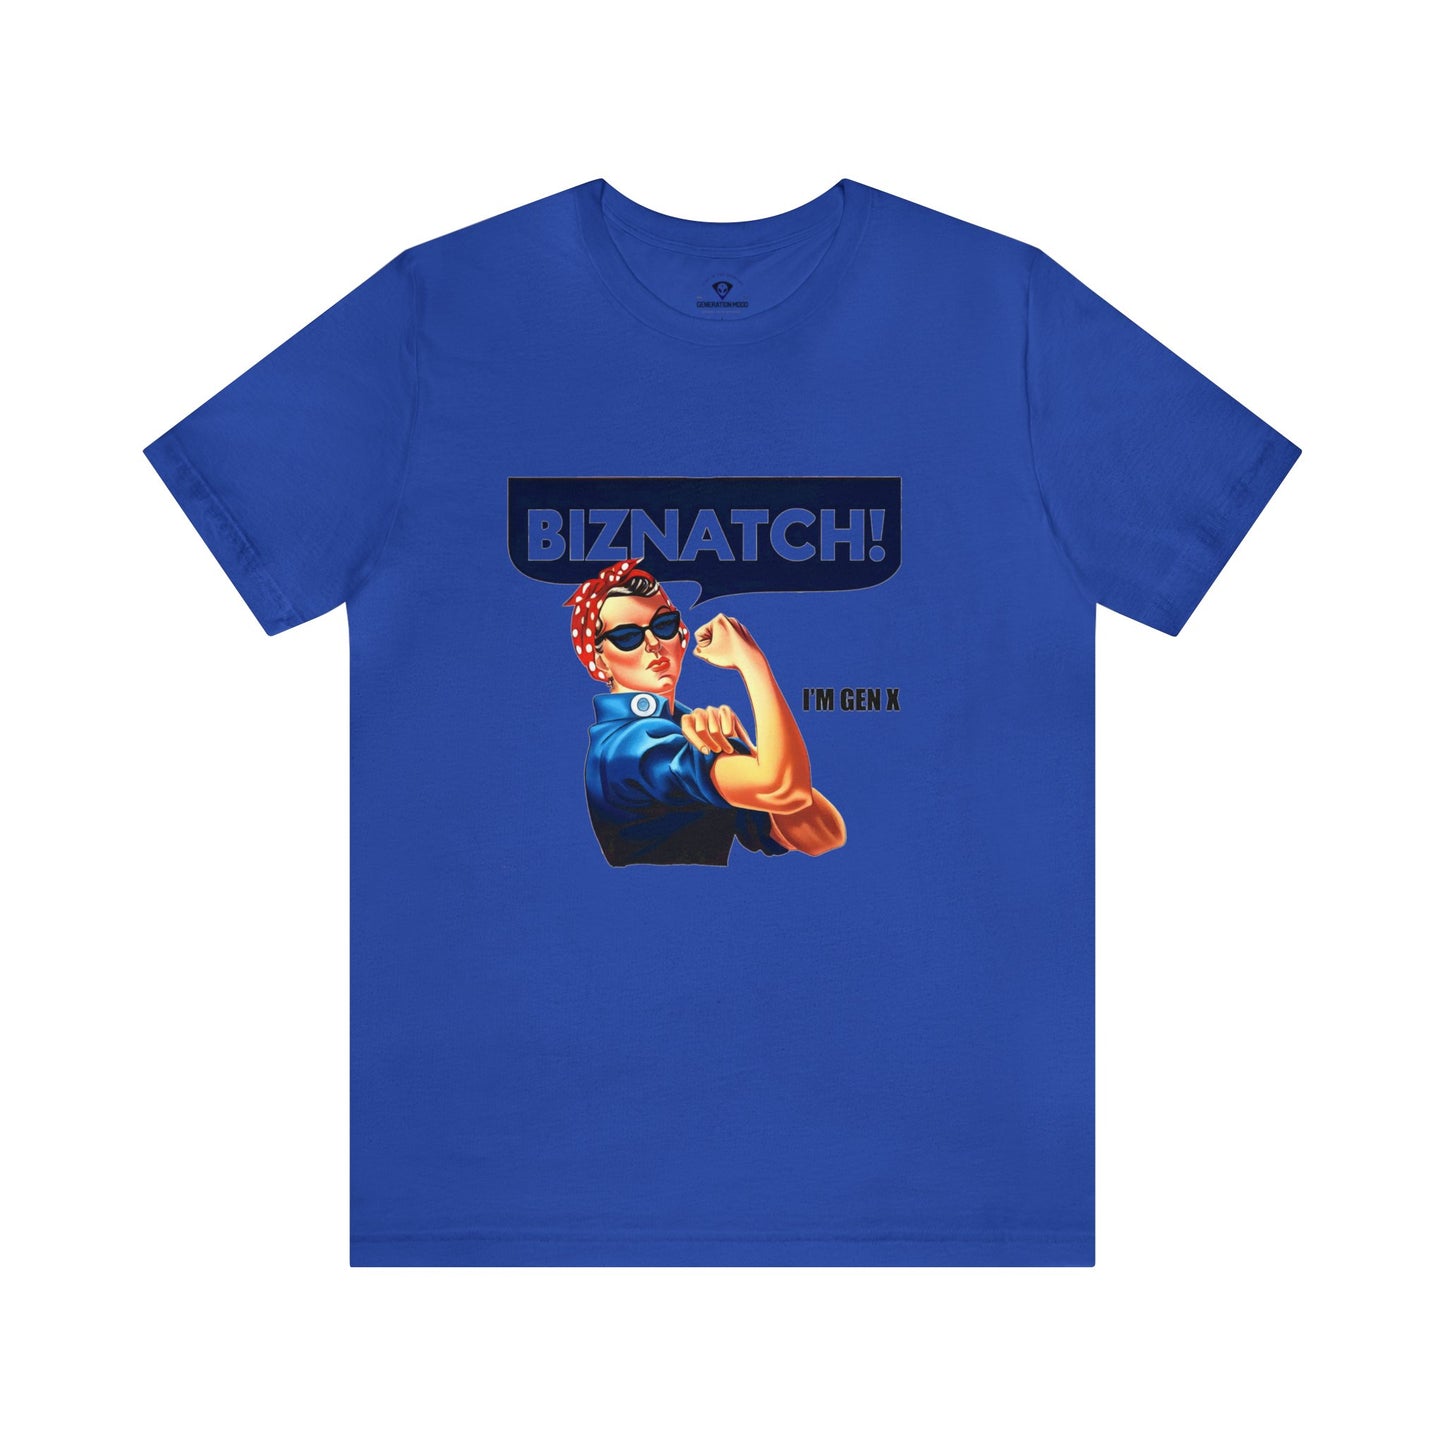 For the Gen X years “Unleash your rebel spirit with our ‘Biznatch! I’m Gen X’ T-Shirt. Classic fit, empowering design. Born between 1965 and 1980? This shirt is your canvas!” 🤘🔥Royal Blue